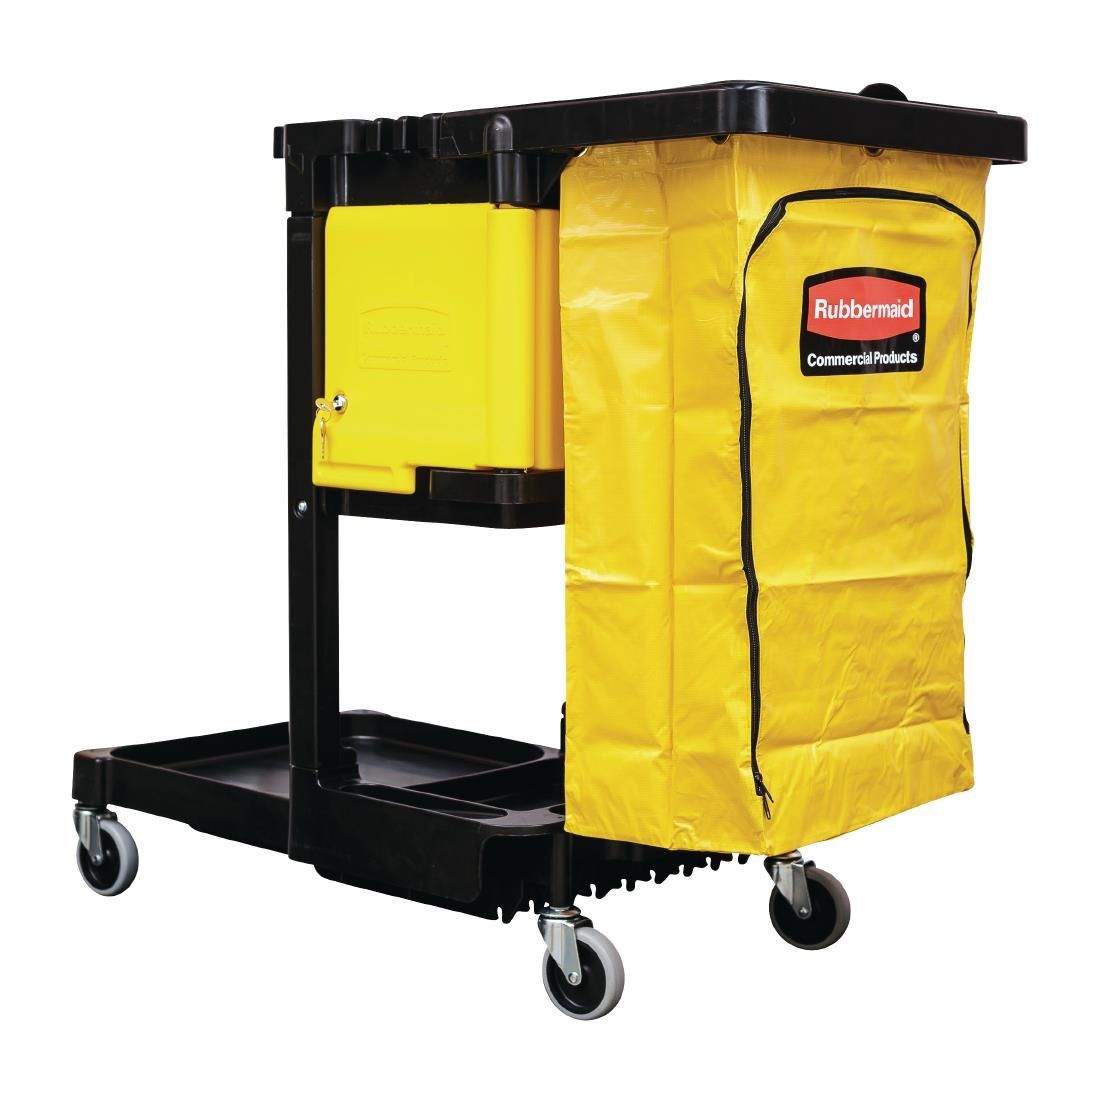 L658 Rubbermaid Cleaning Trolley